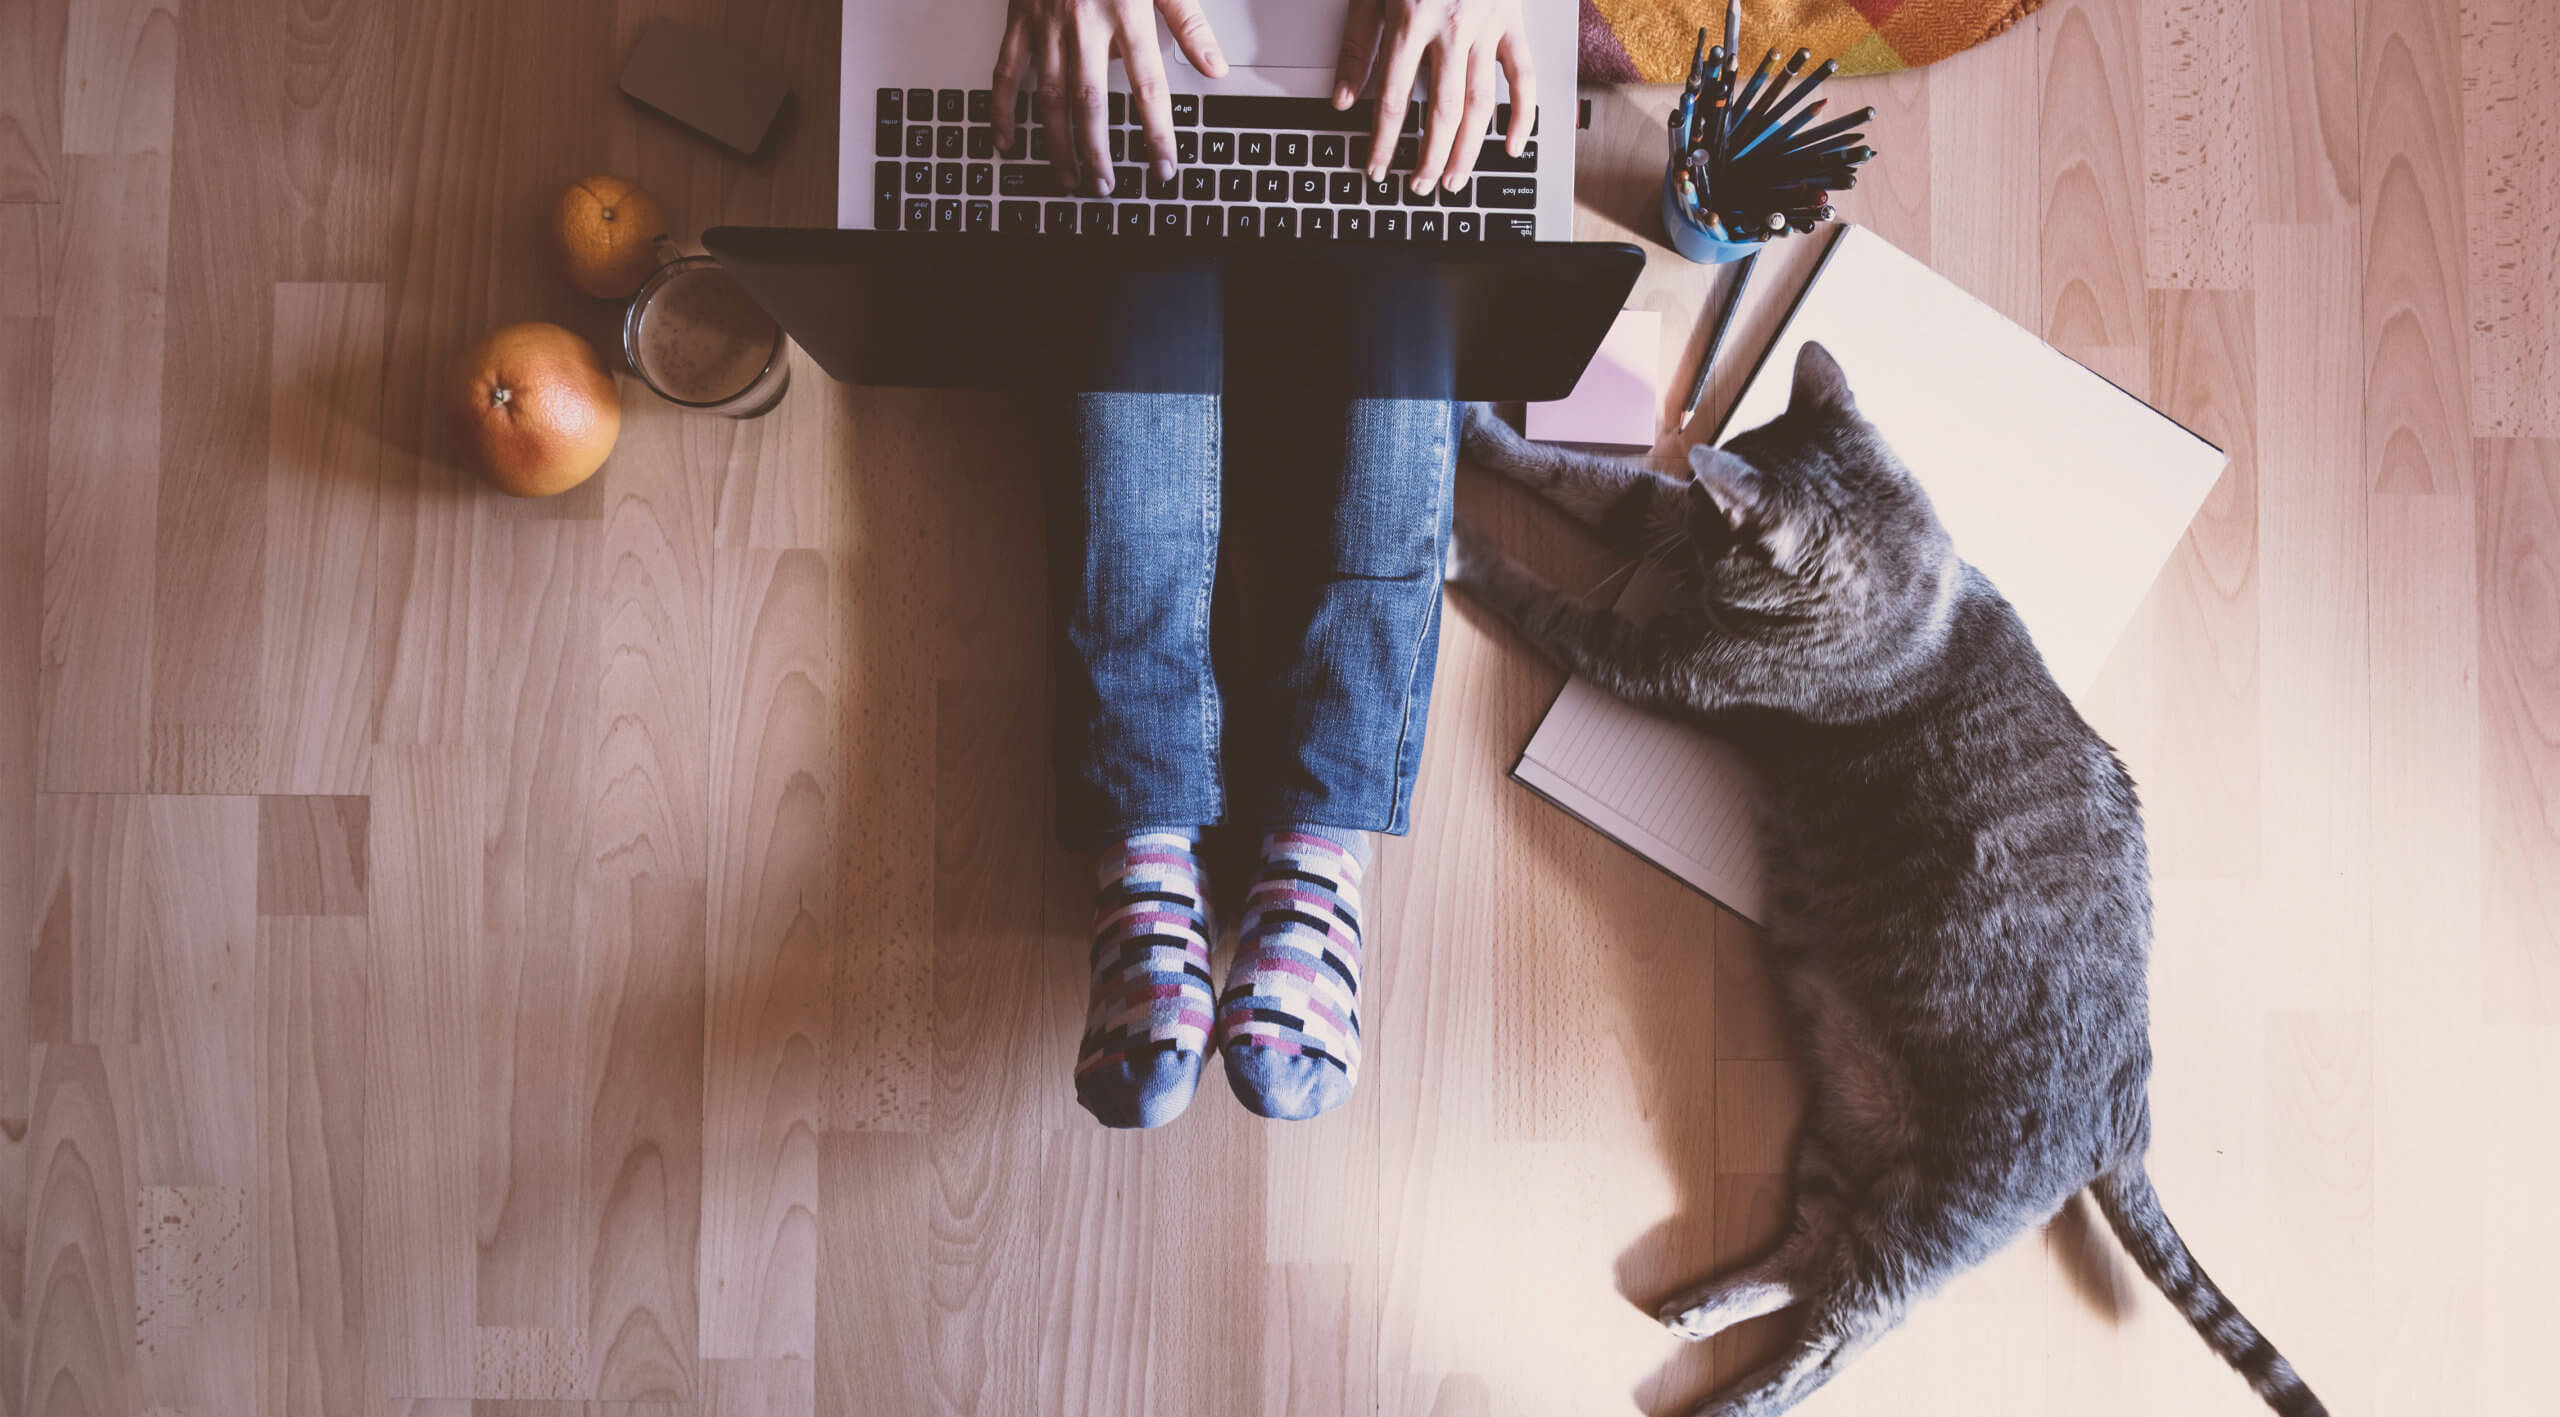 Working from Home during COVID-19? What You and Your Organization Need to Consider